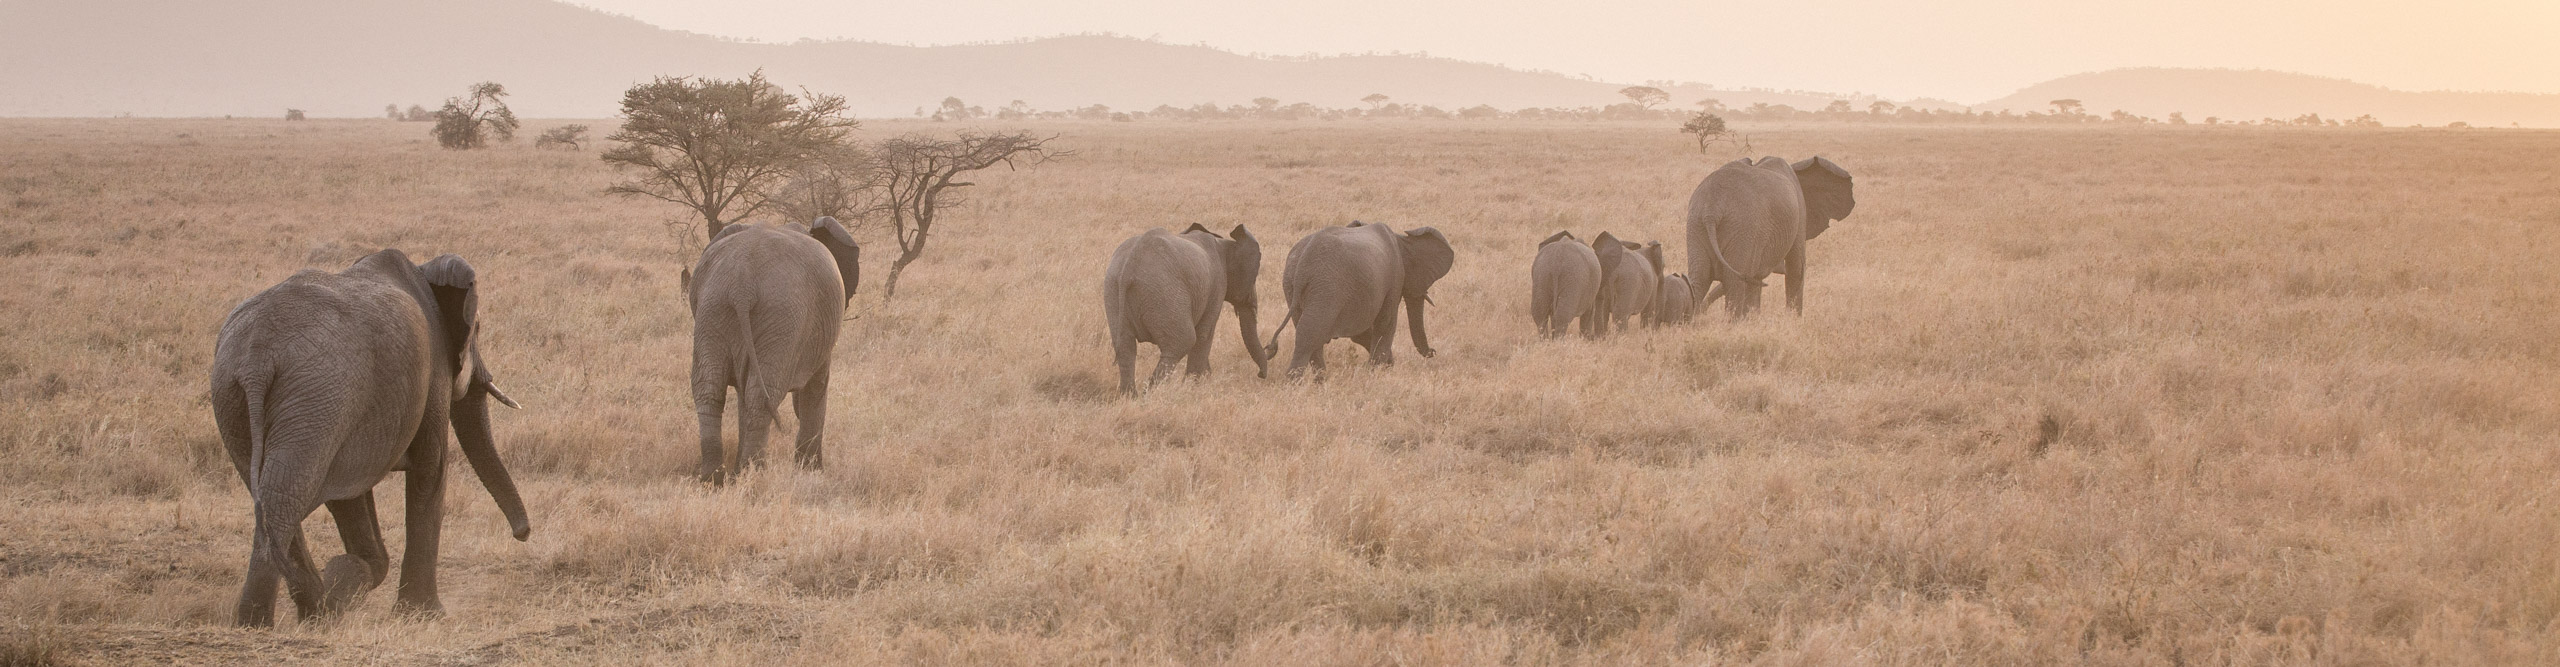 Elephant herd with 3 young calves walking across the Serengeti on a dusty day